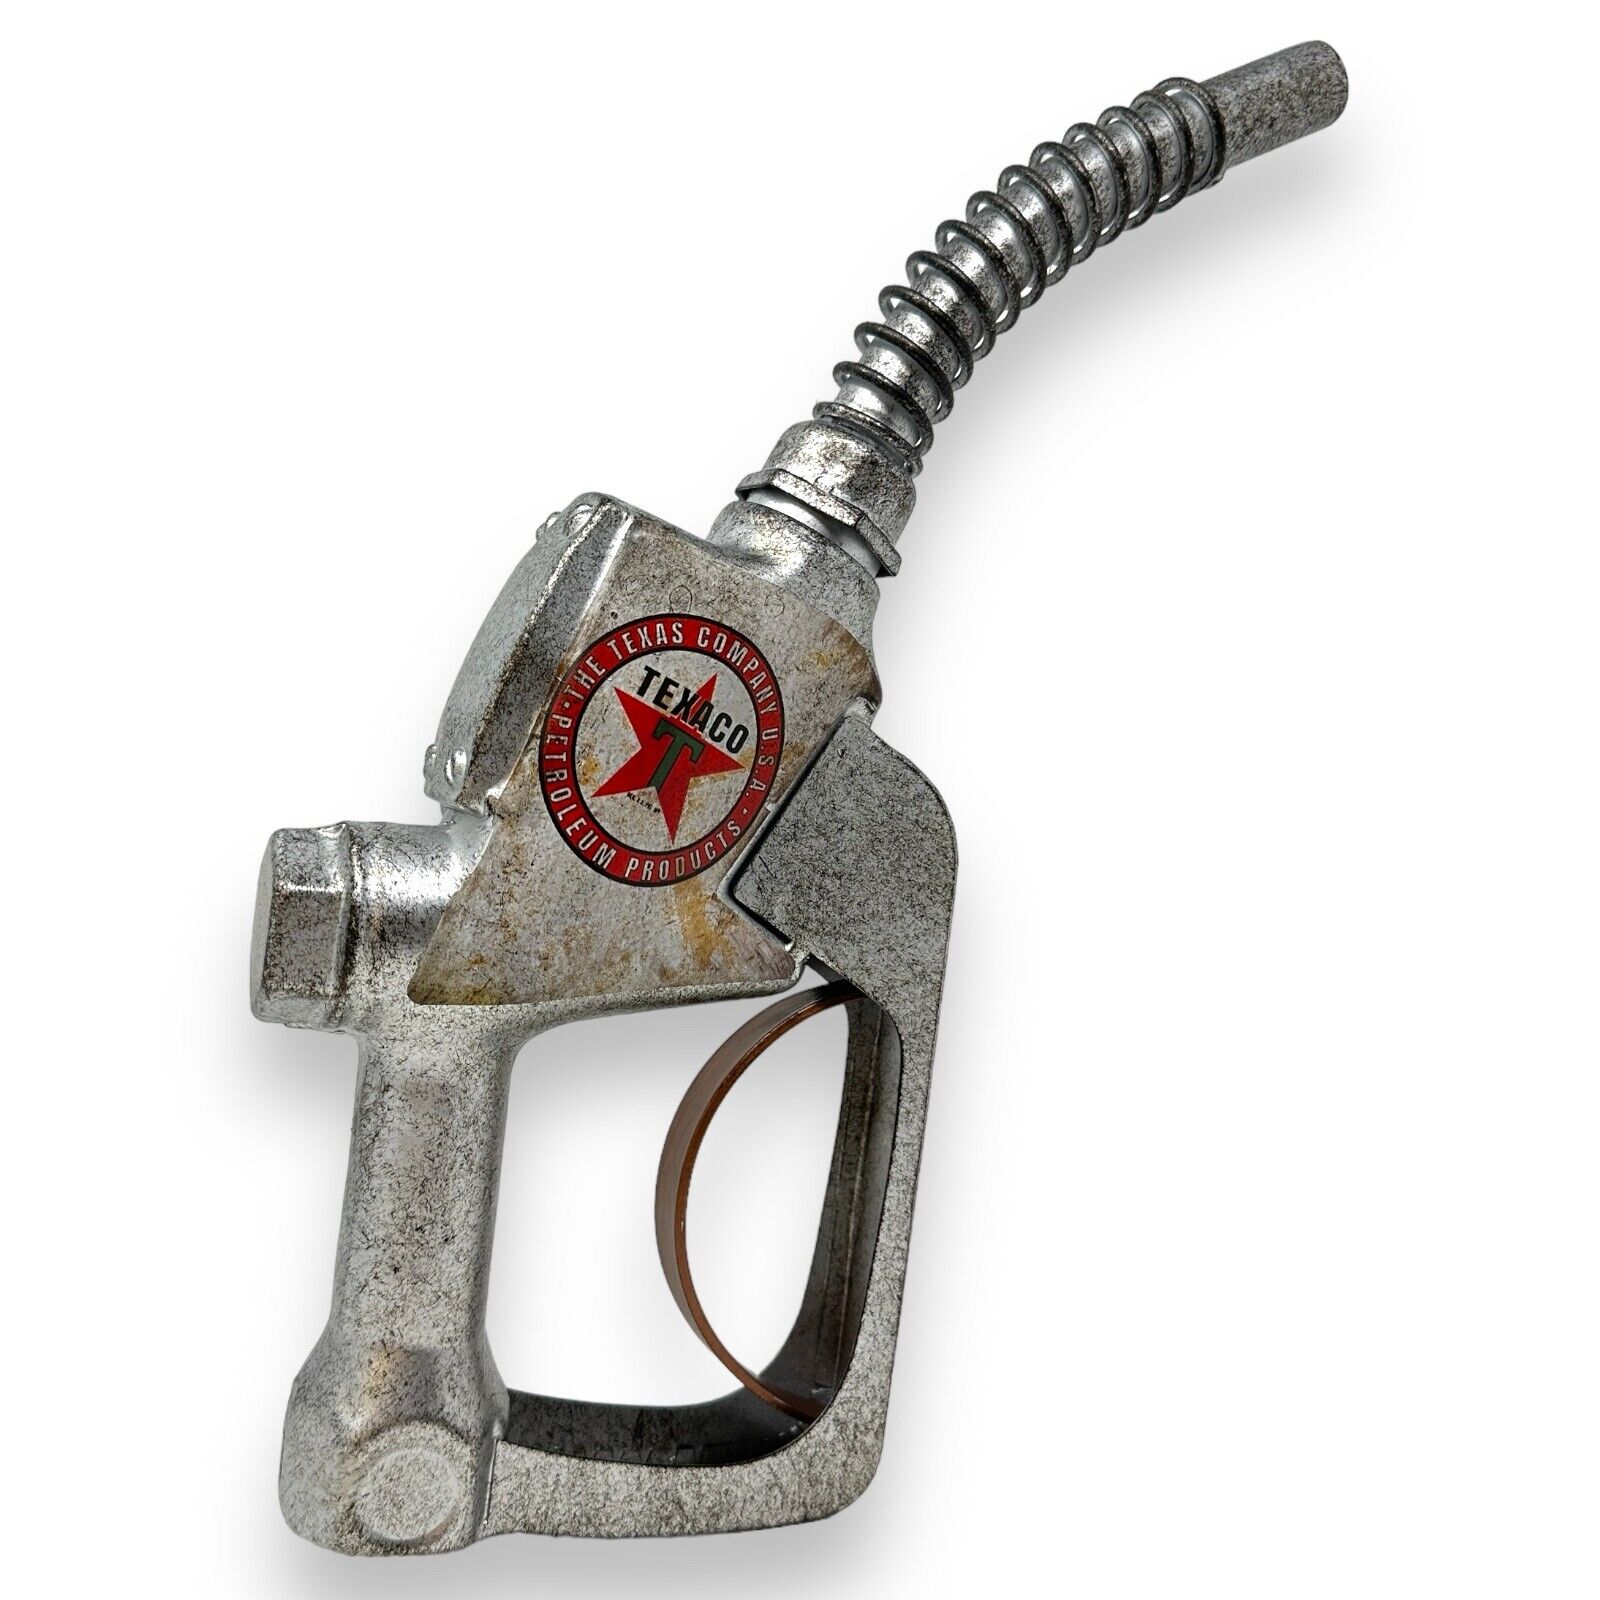 Texaco Gas Pump Nozzle Wall Decor With Vintage Inspired Design